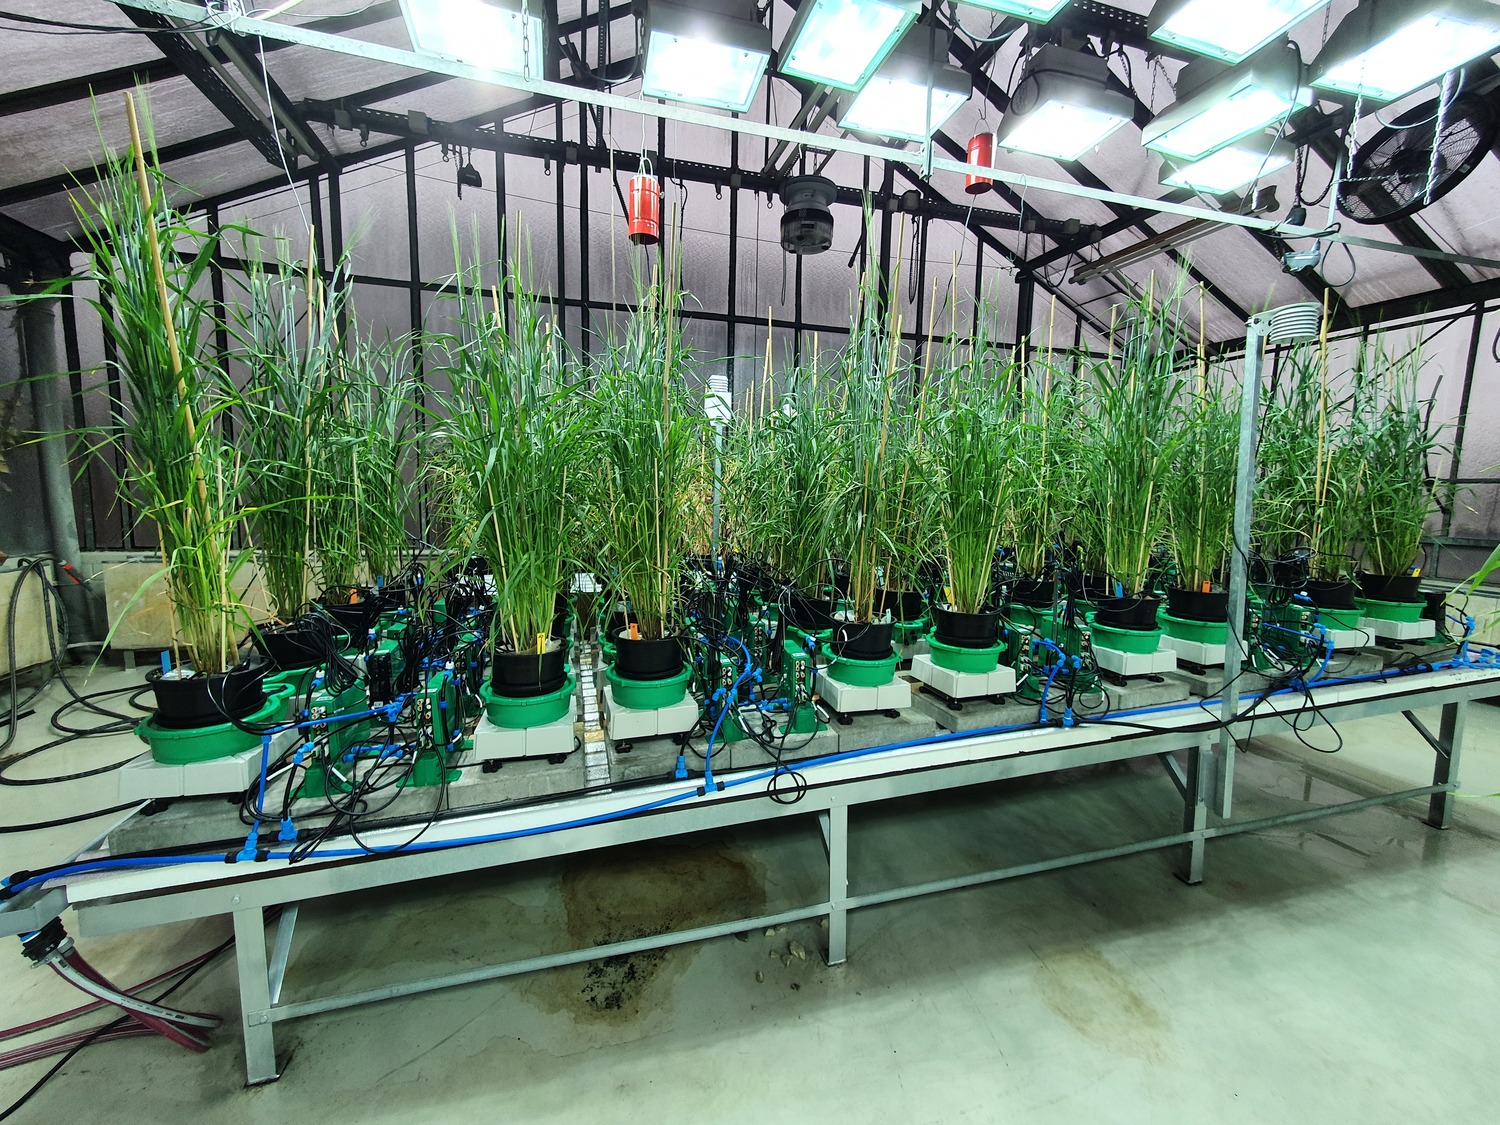 Testing the water response behaviour of barley genotypes in the TROPAGS greenhouse.